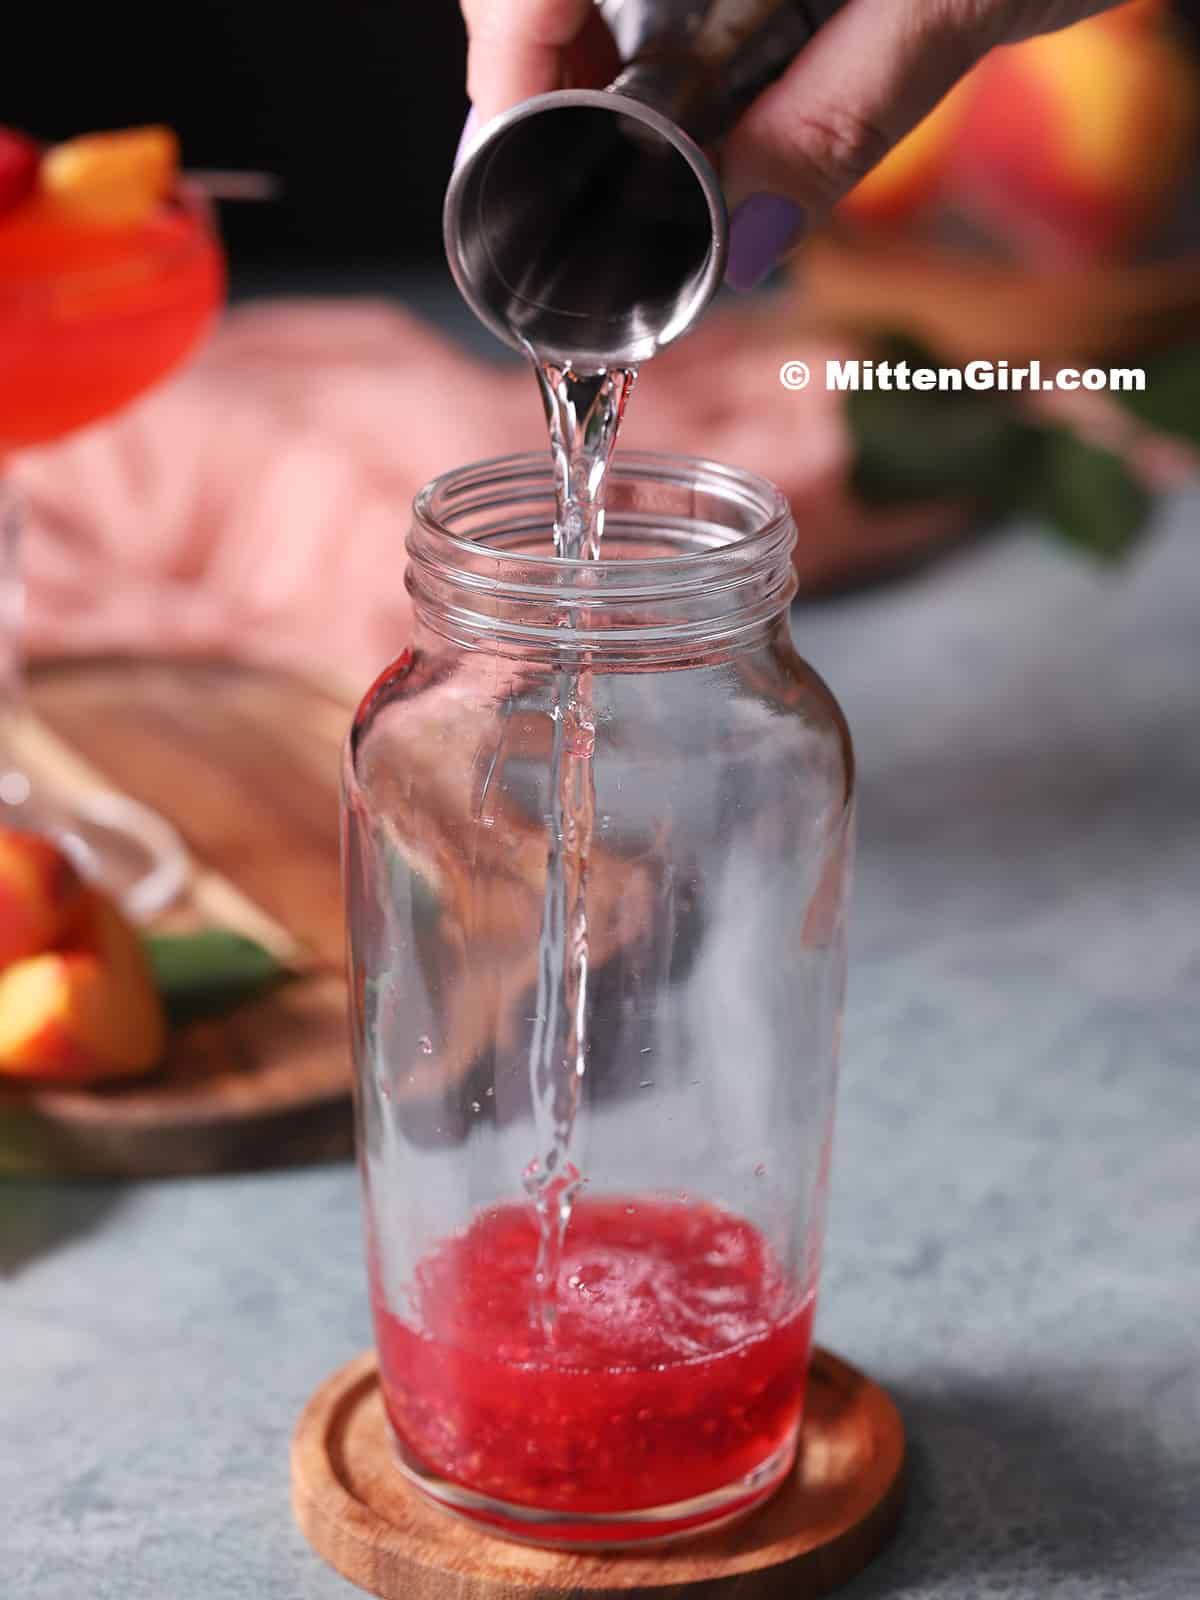 Raspberry vodka being poured into a cocktail shaker.